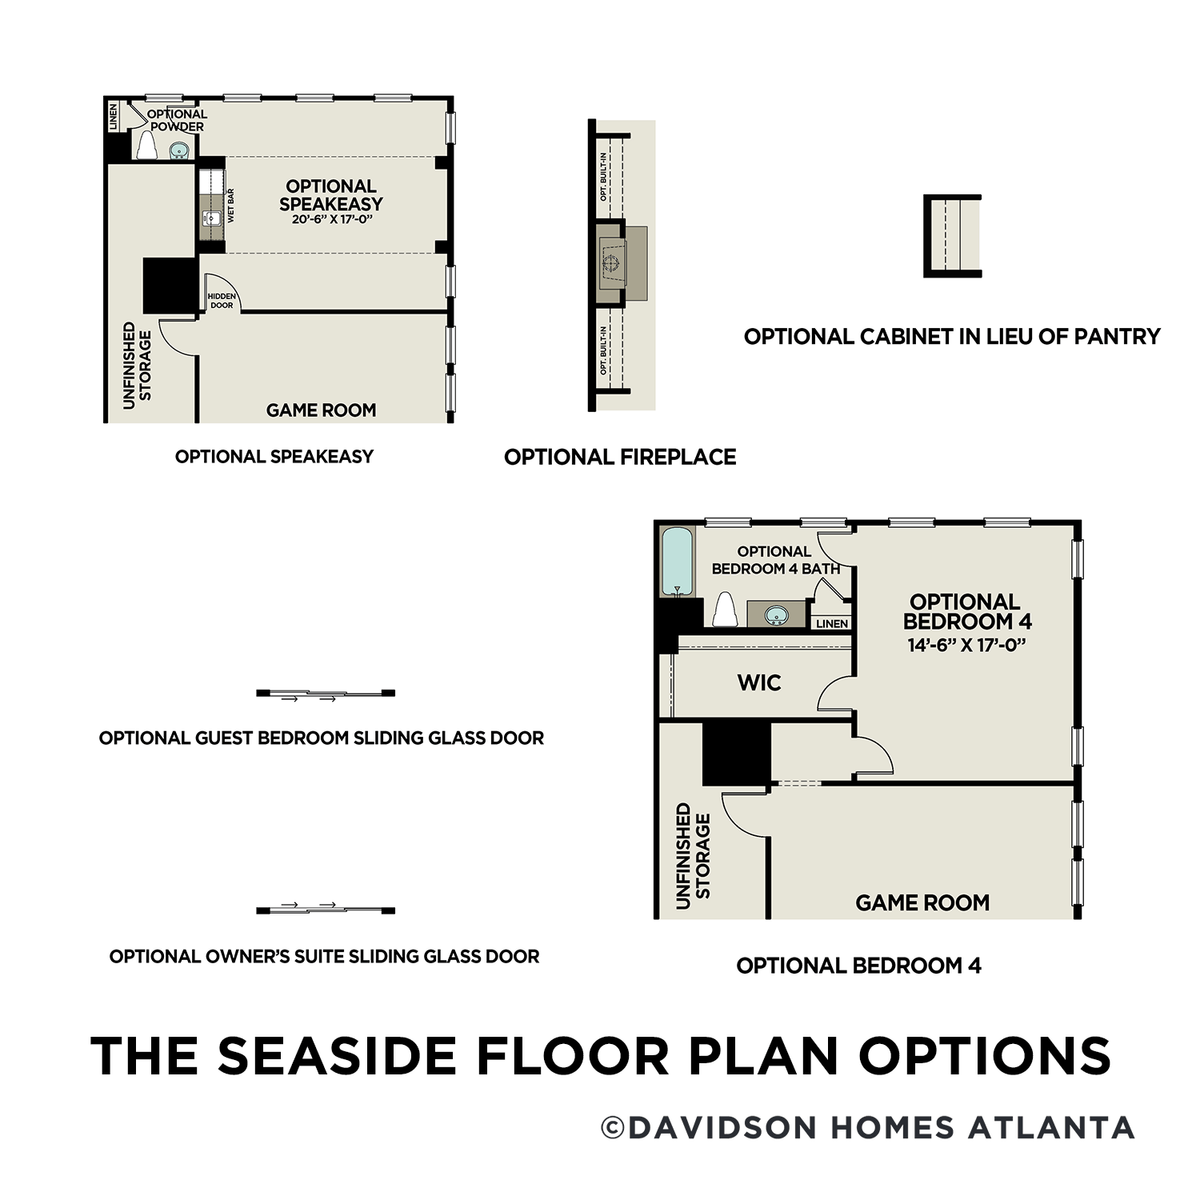 3 - The Seaside A buildable floor plan layout in Davidson Homes' The Village at Towne Lake community.